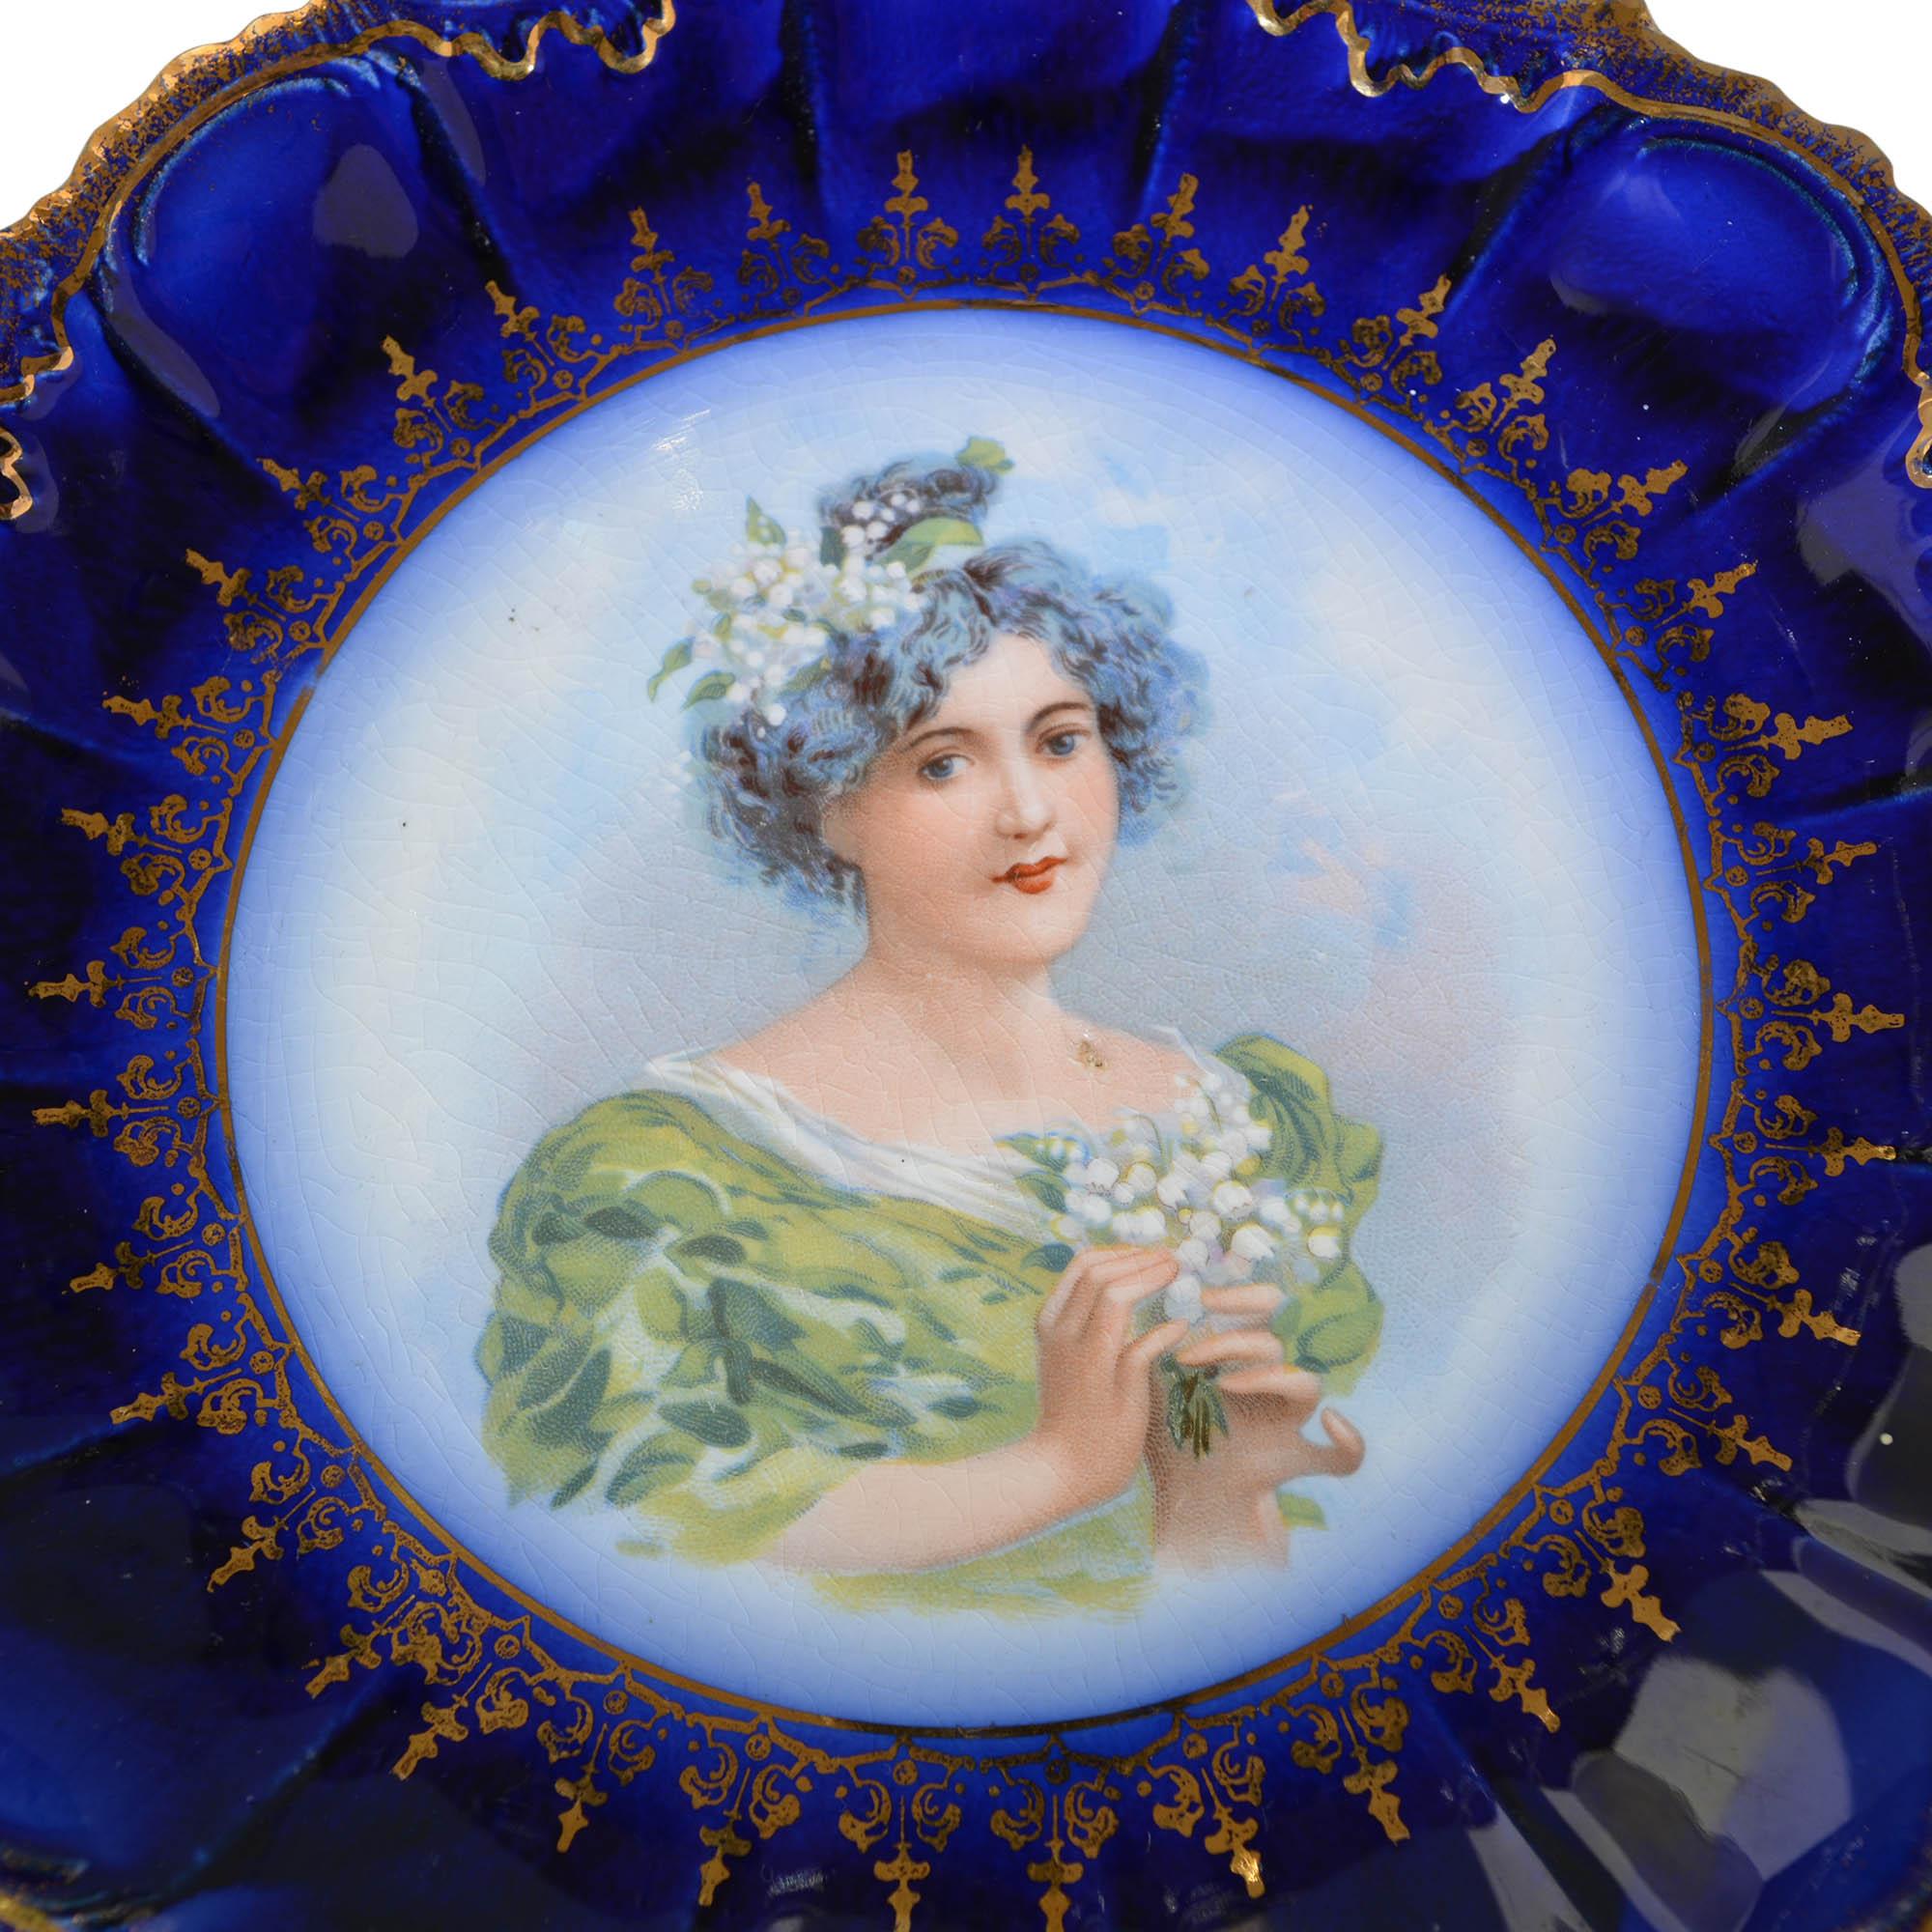 The deep, royal blue rim of the flow blue plate is beautifully accented with rich gold trim along the scalloped edges. The center reflects an amazingly hand painted portrait of a lovely lady with a bouquet of flowers in fine detail. 

Marked on